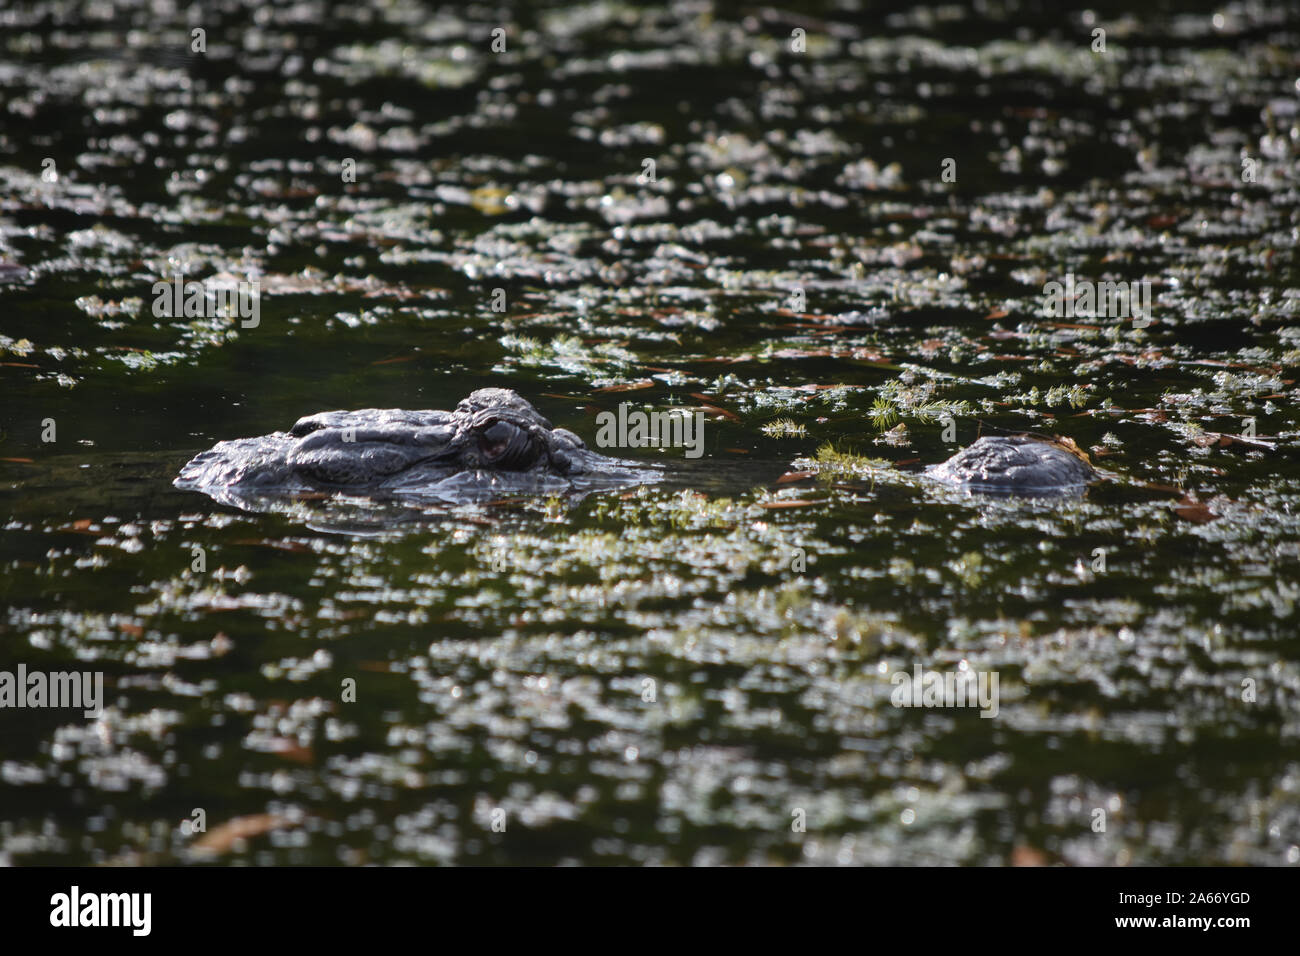 Gator with his eyes and snout just above the swamp water. Stock Photo